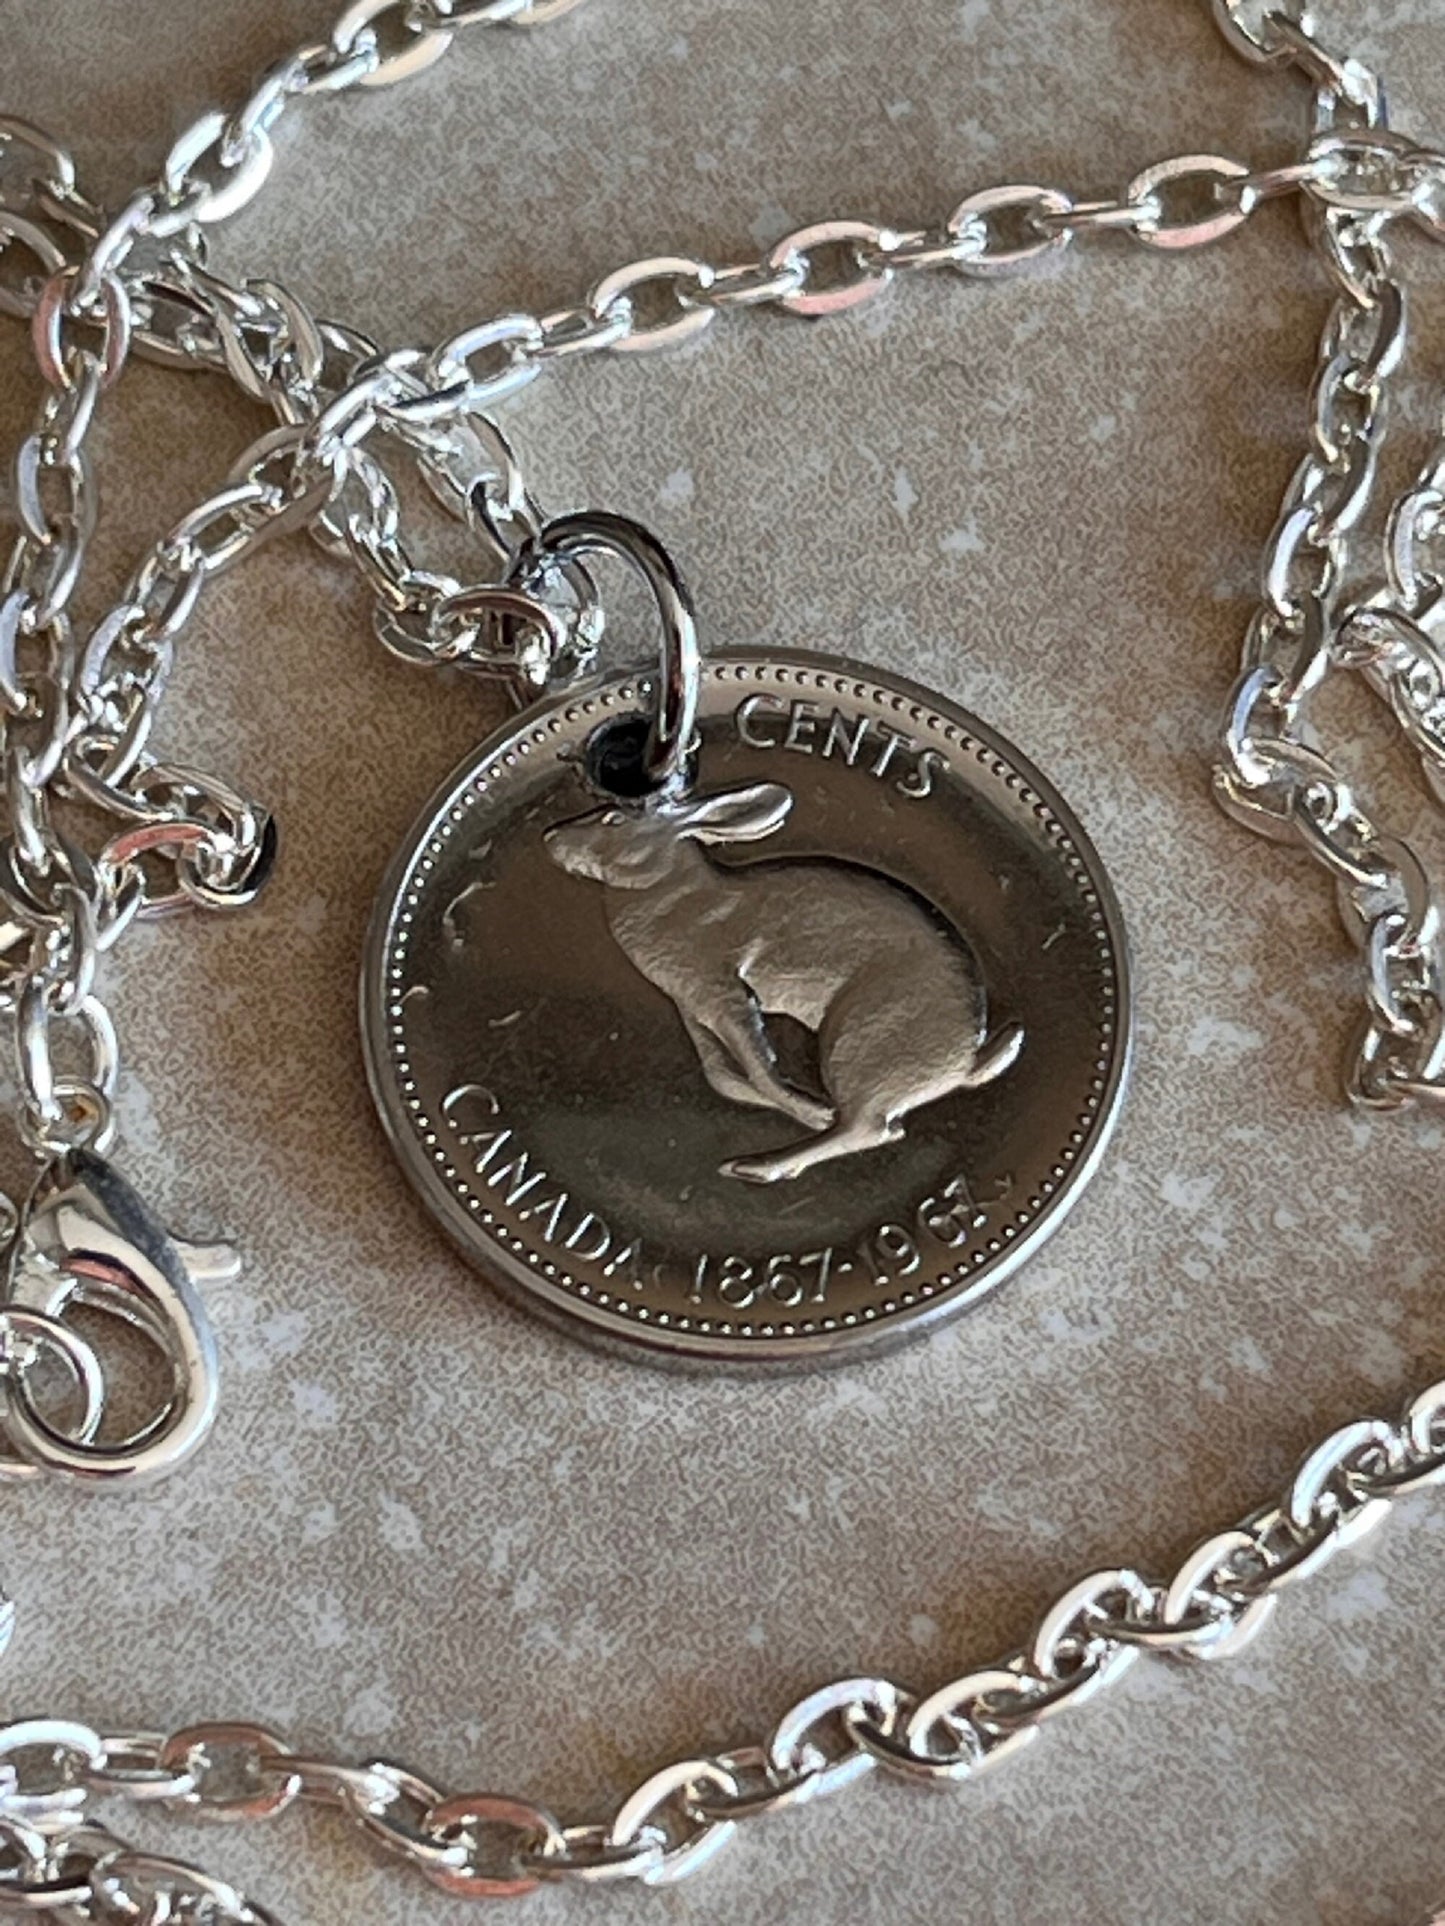 Canada Coin Necklace 5 Cent Nickel Pendant Personal Necklace Old Vintage Handmade Jewelry Gift Friend Charm For Him Her World Coin Collector